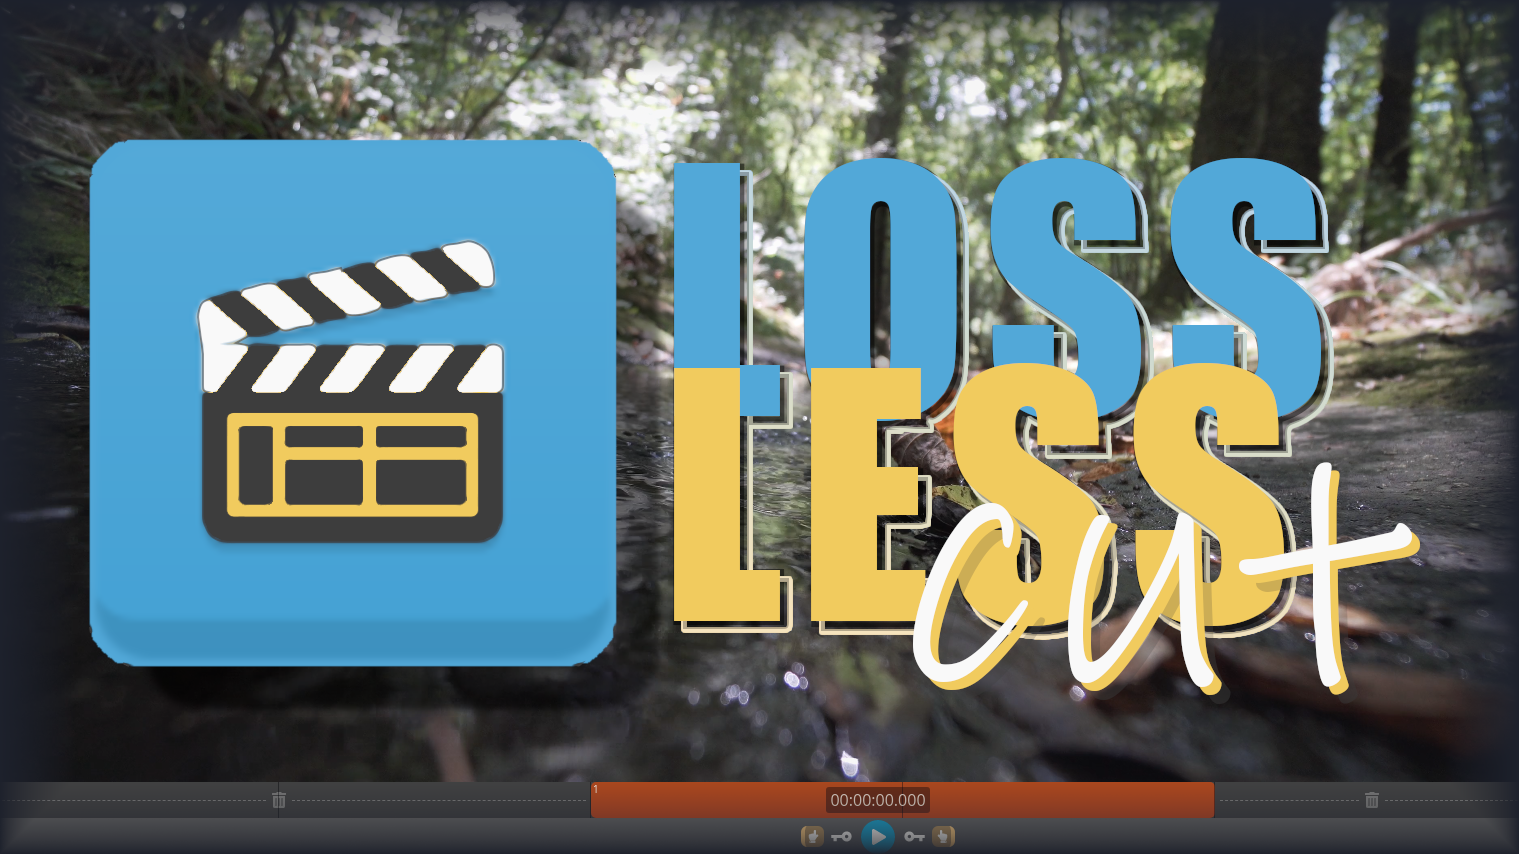 LosslessCut: My Most Used Video Editor